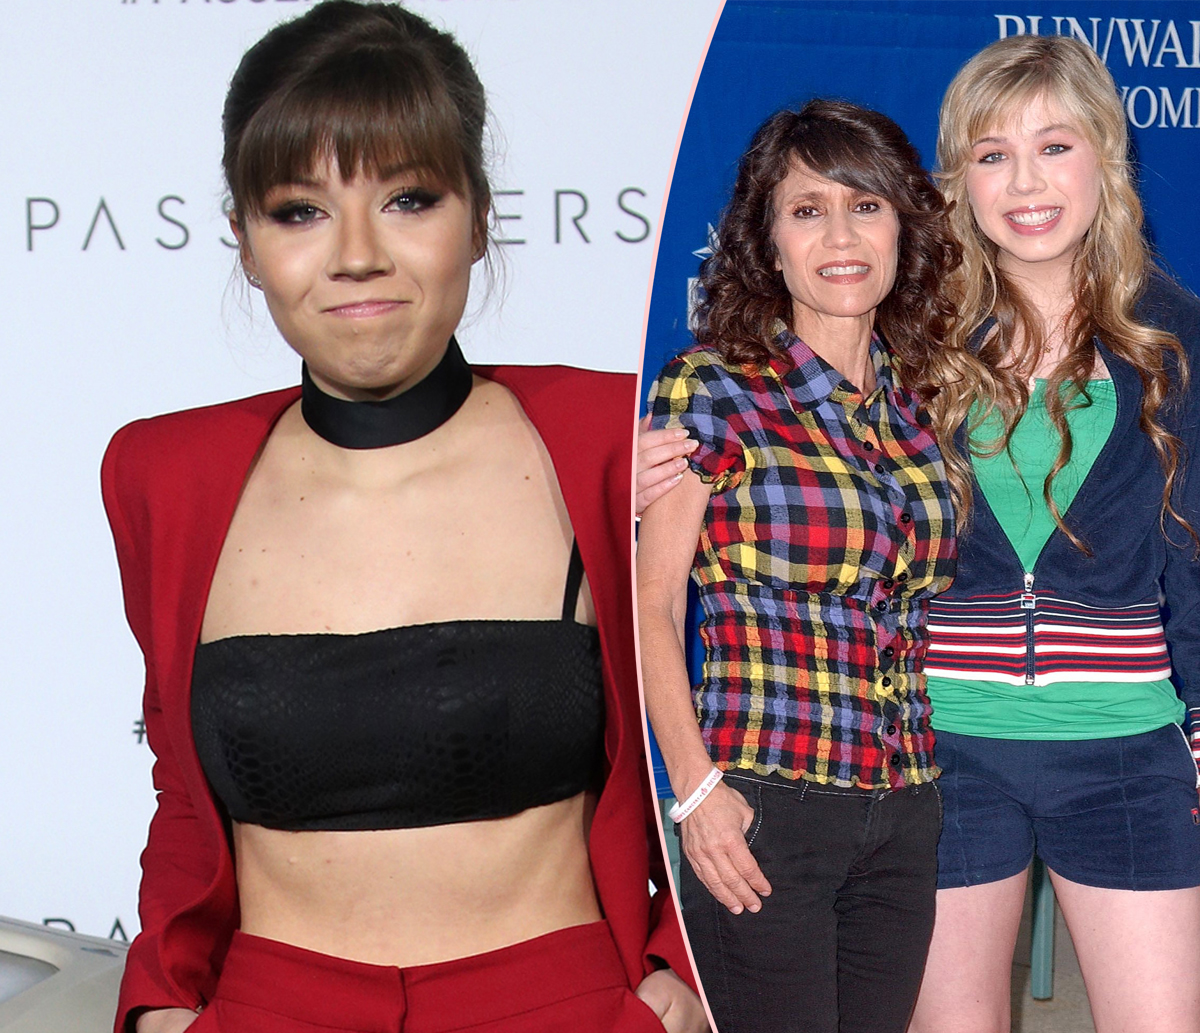 Jennette McCurdy Details Her Mother’s ‘Abuse’ & ‘Conditioning’ To Become